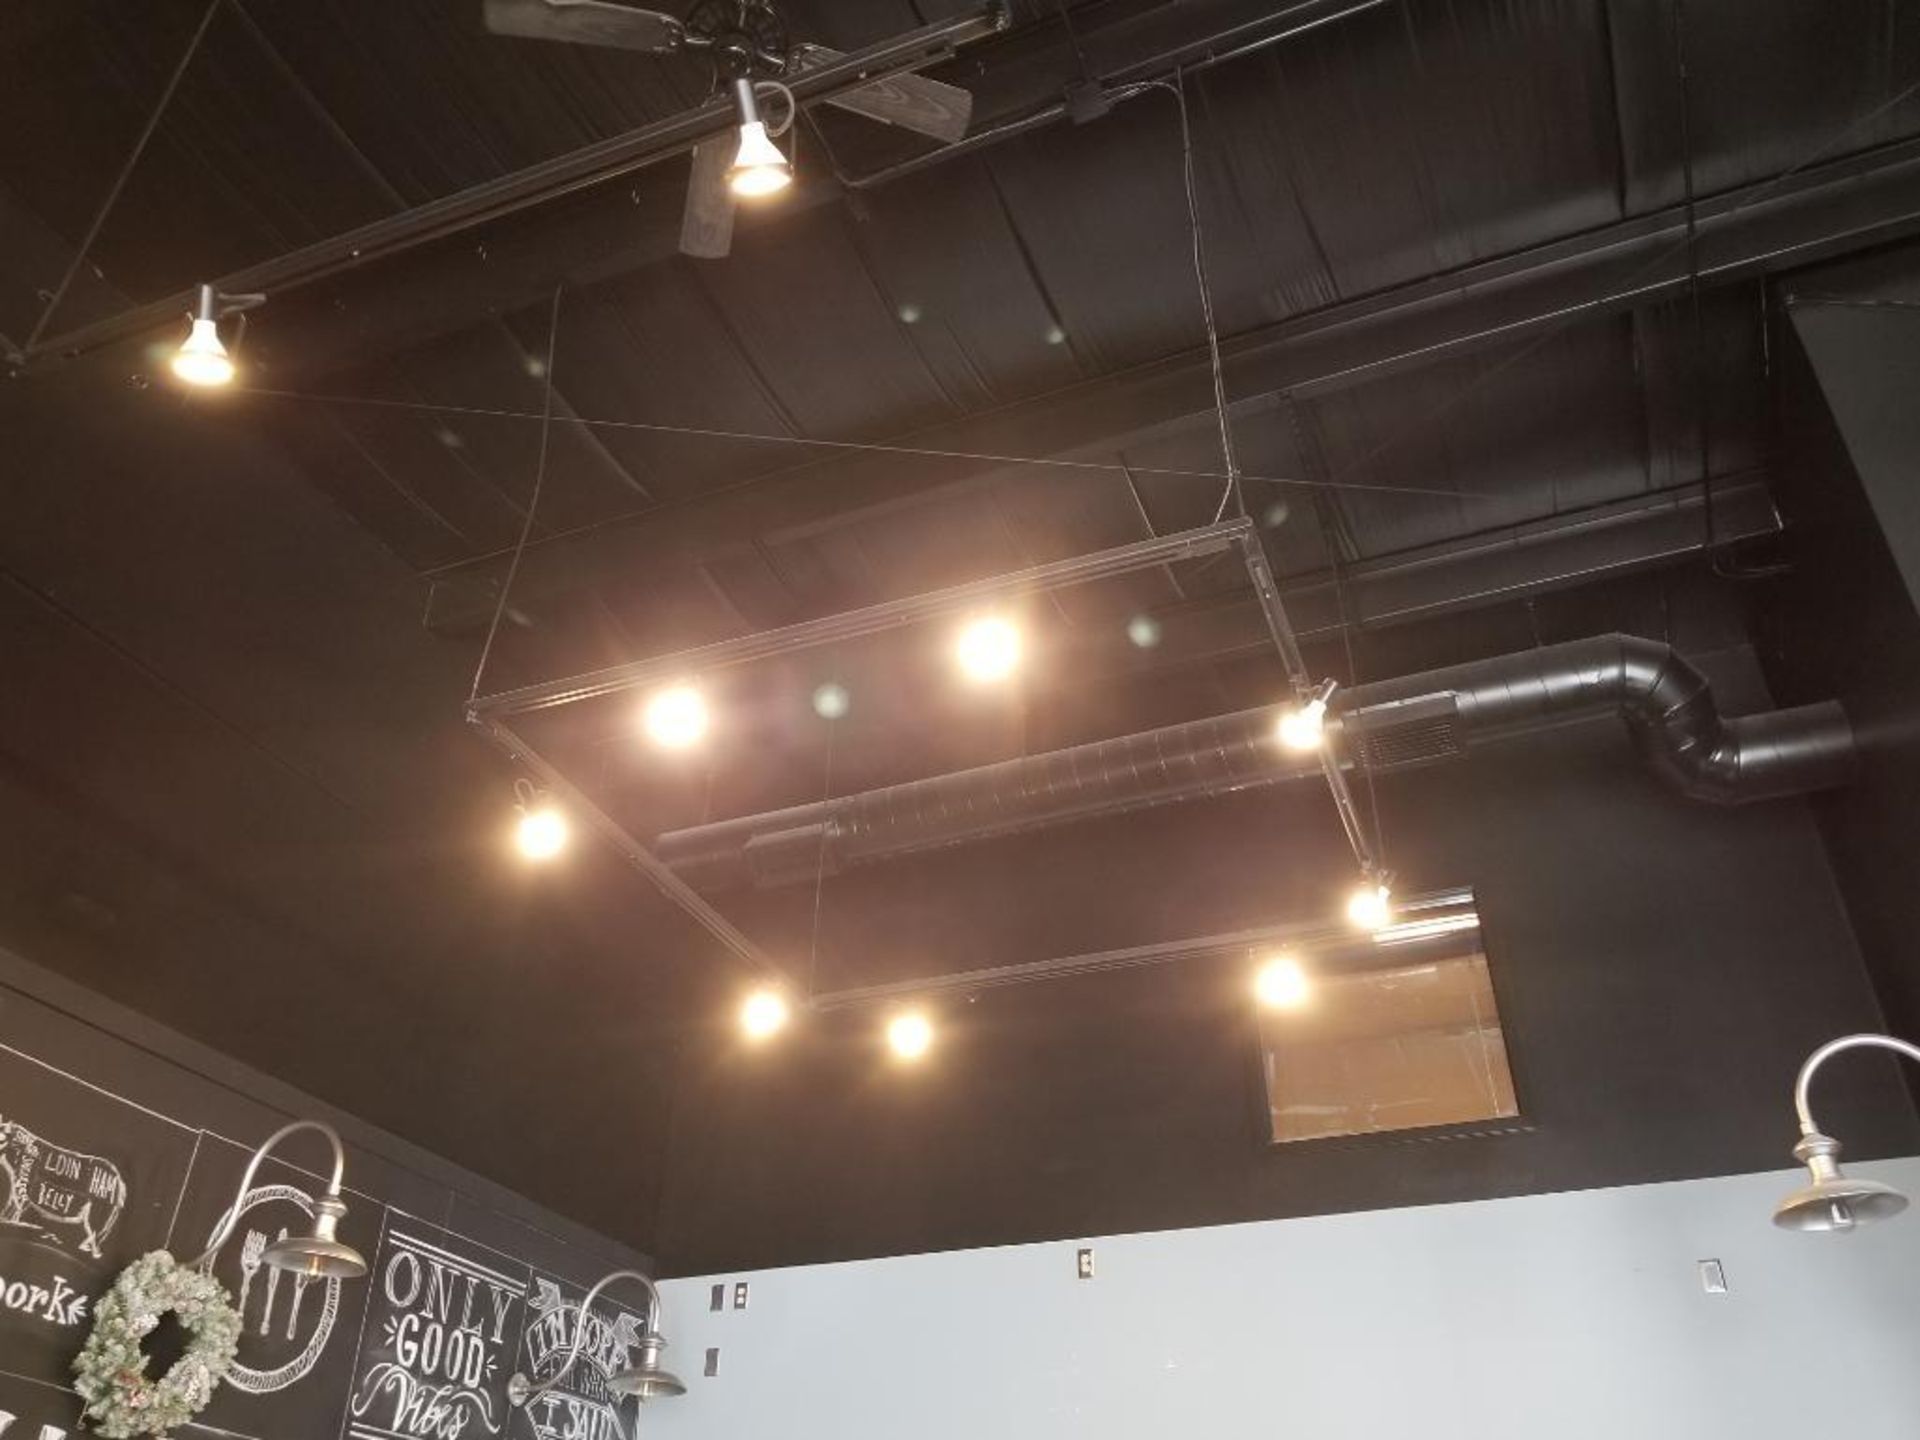 Qty 2 - Ceiling hung light fixtures. - Image 2 of 2